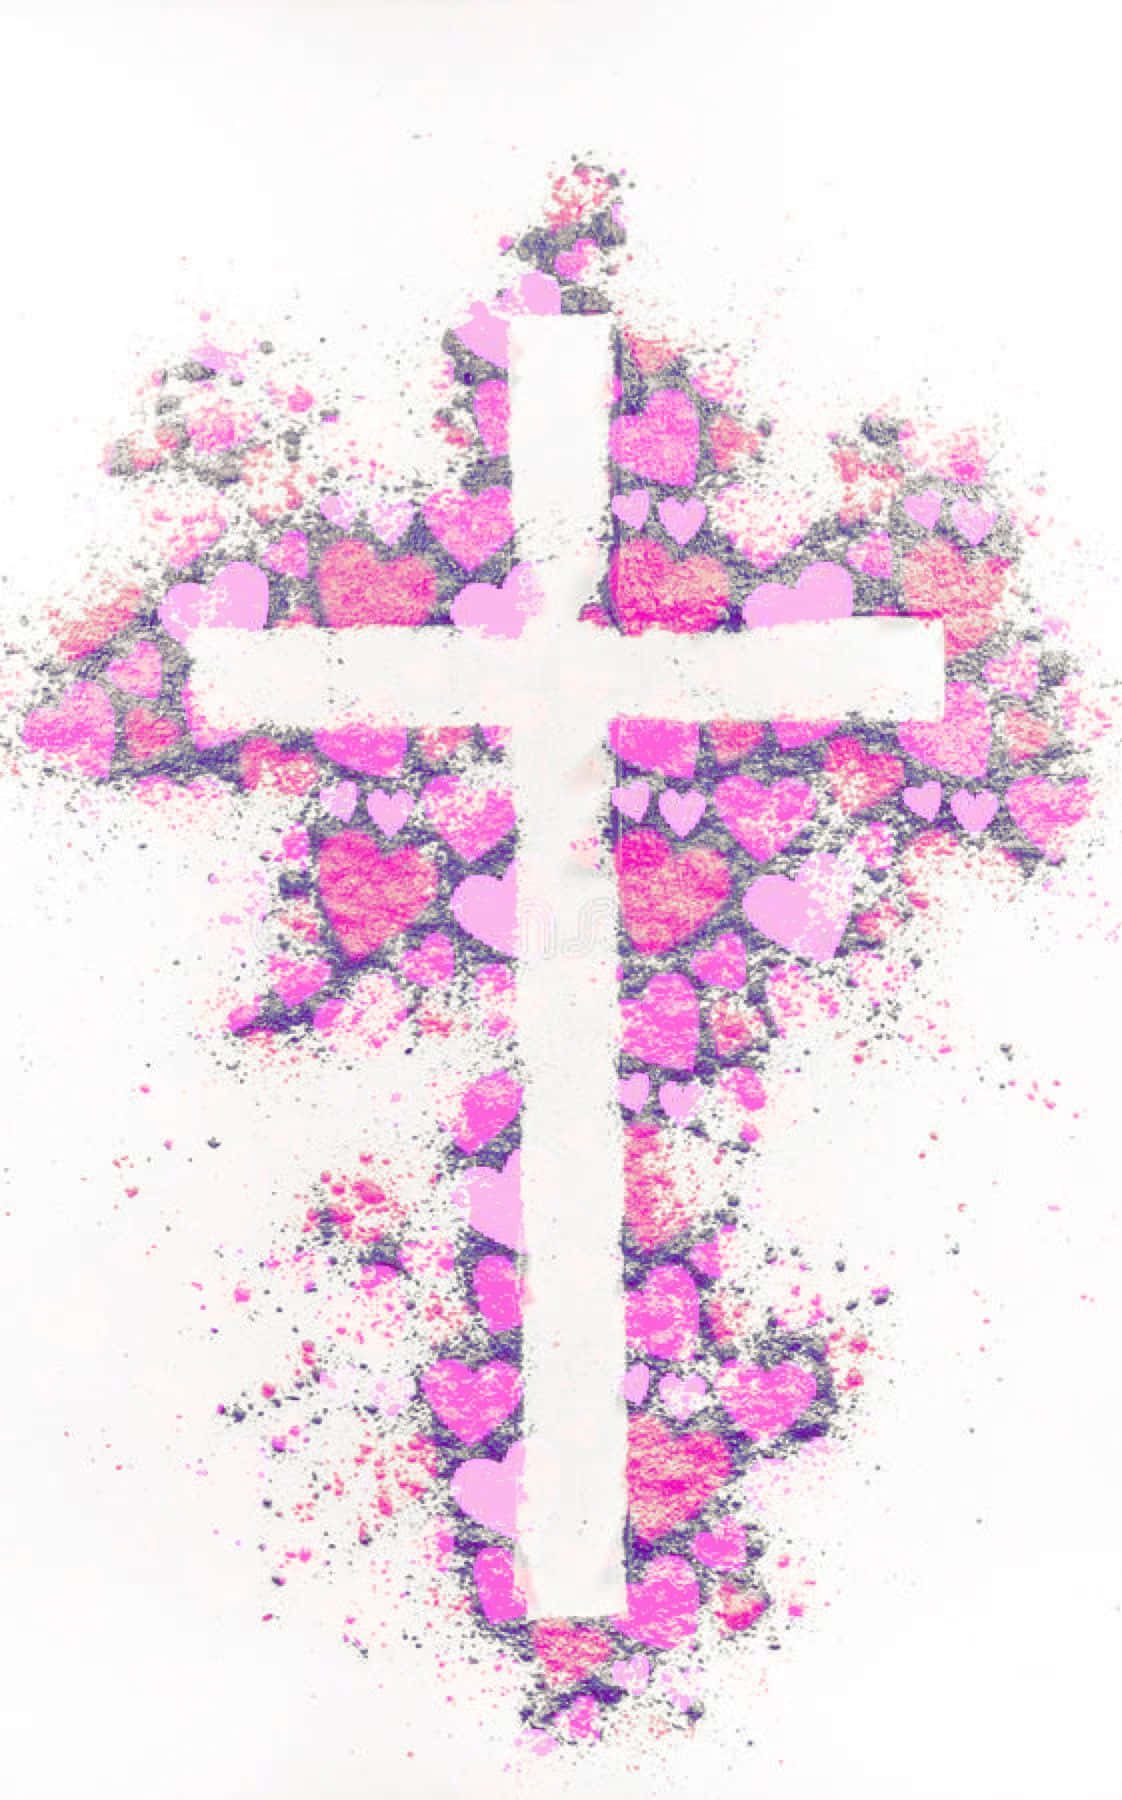 Download A Cross With Pink Hearts On It Wallpaper